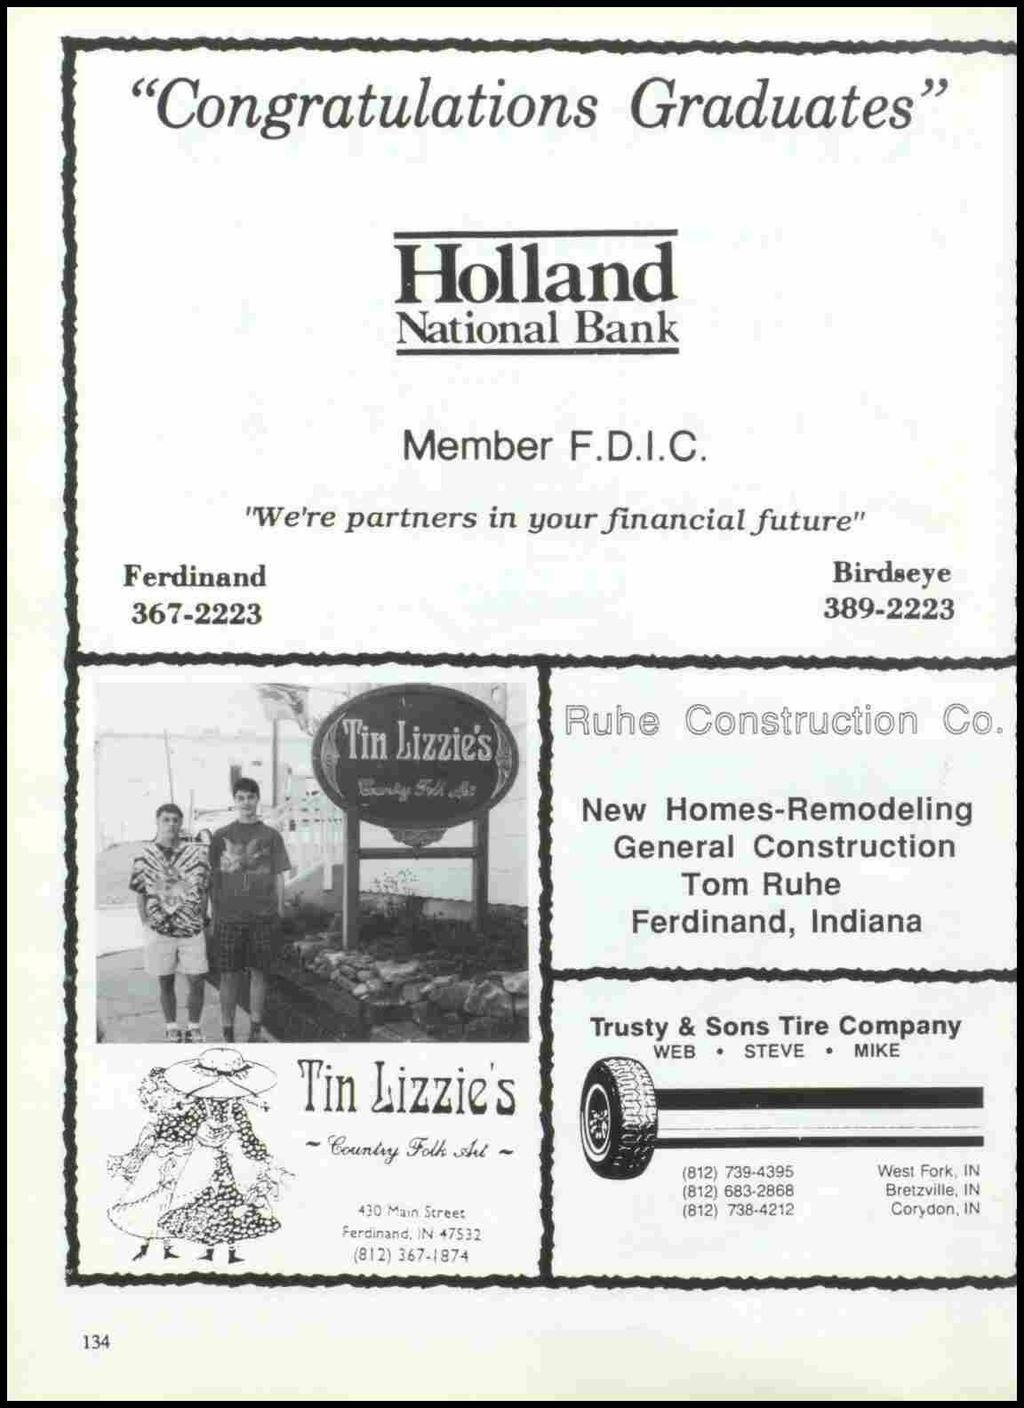 "Congratulations Graduates" Holland National Bank Ferdinand 367-2223 Member F.D.I.C. 'We're partners in your financial future" Birdseye 389-2223 New Homes-Remodeling General Construction Tom Ruhe Ferdinand, Indiana ;p-~ Tin Lizzie ~ - ~ 'oa.